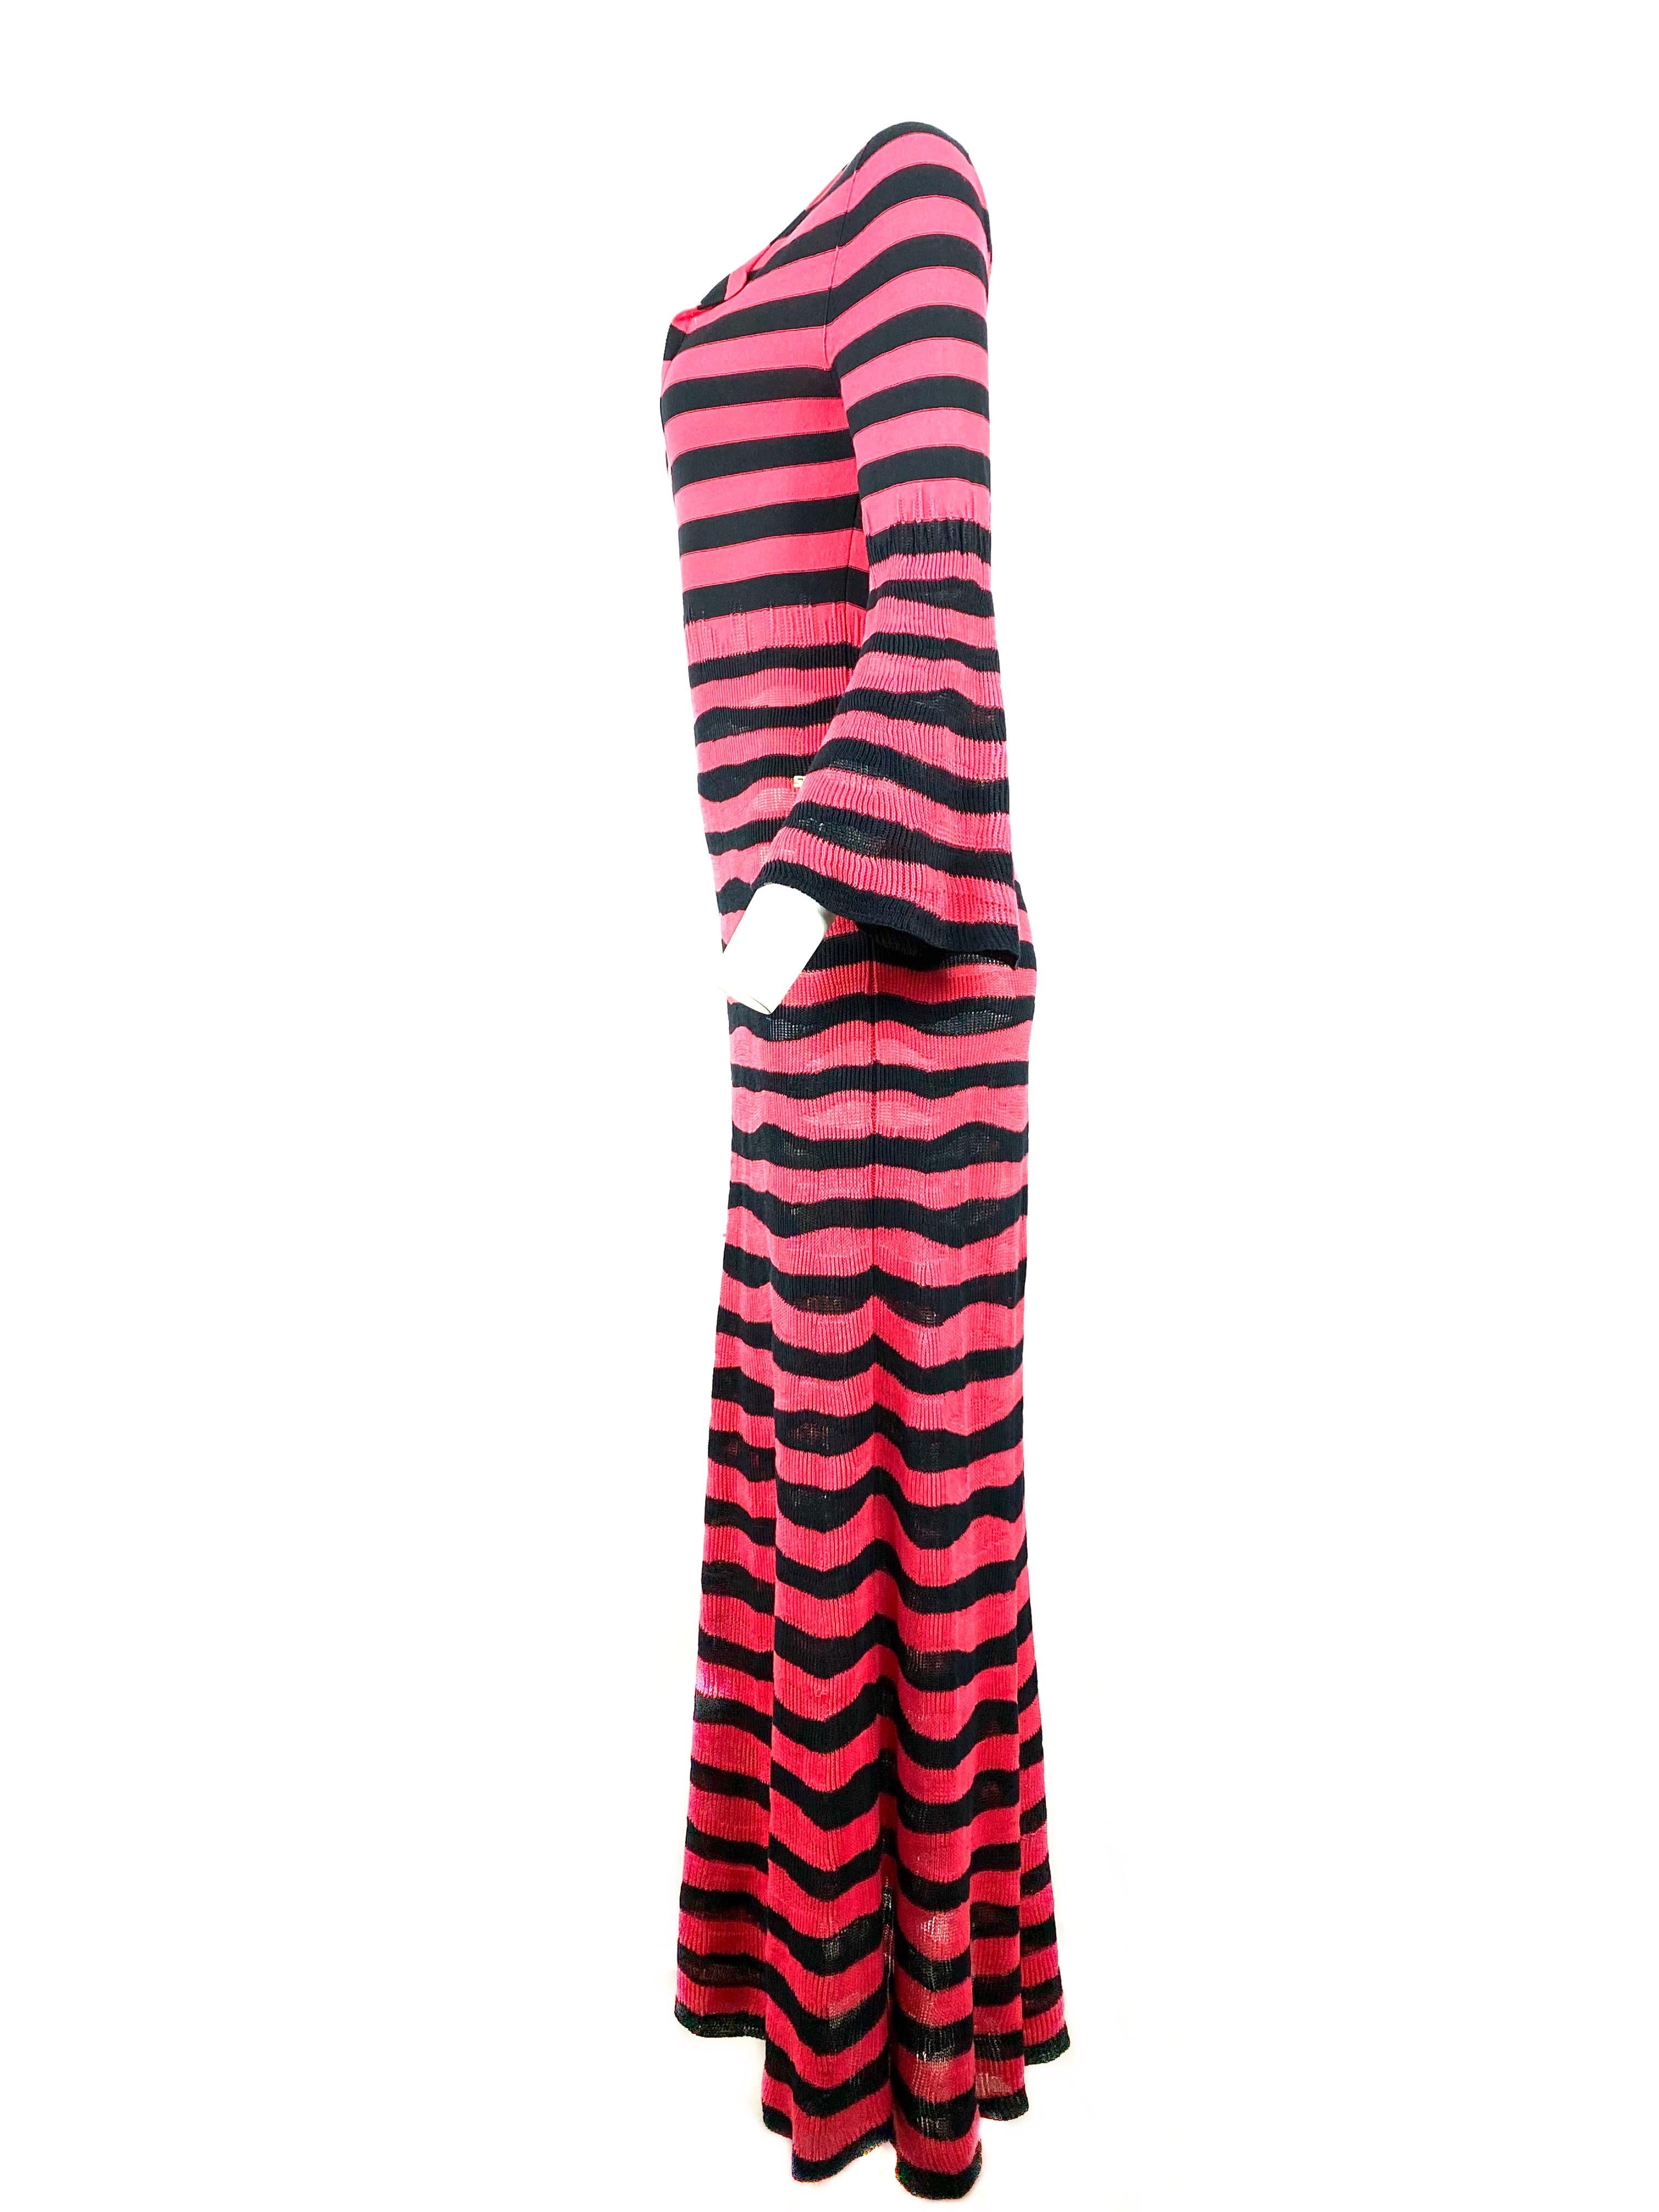 Sonia Rykiel Paris Pink and Navy Striped Maxi Dress w/ Flower Brooch Size 38 In Excellent Condition For Sale In Beverly Hills, CA